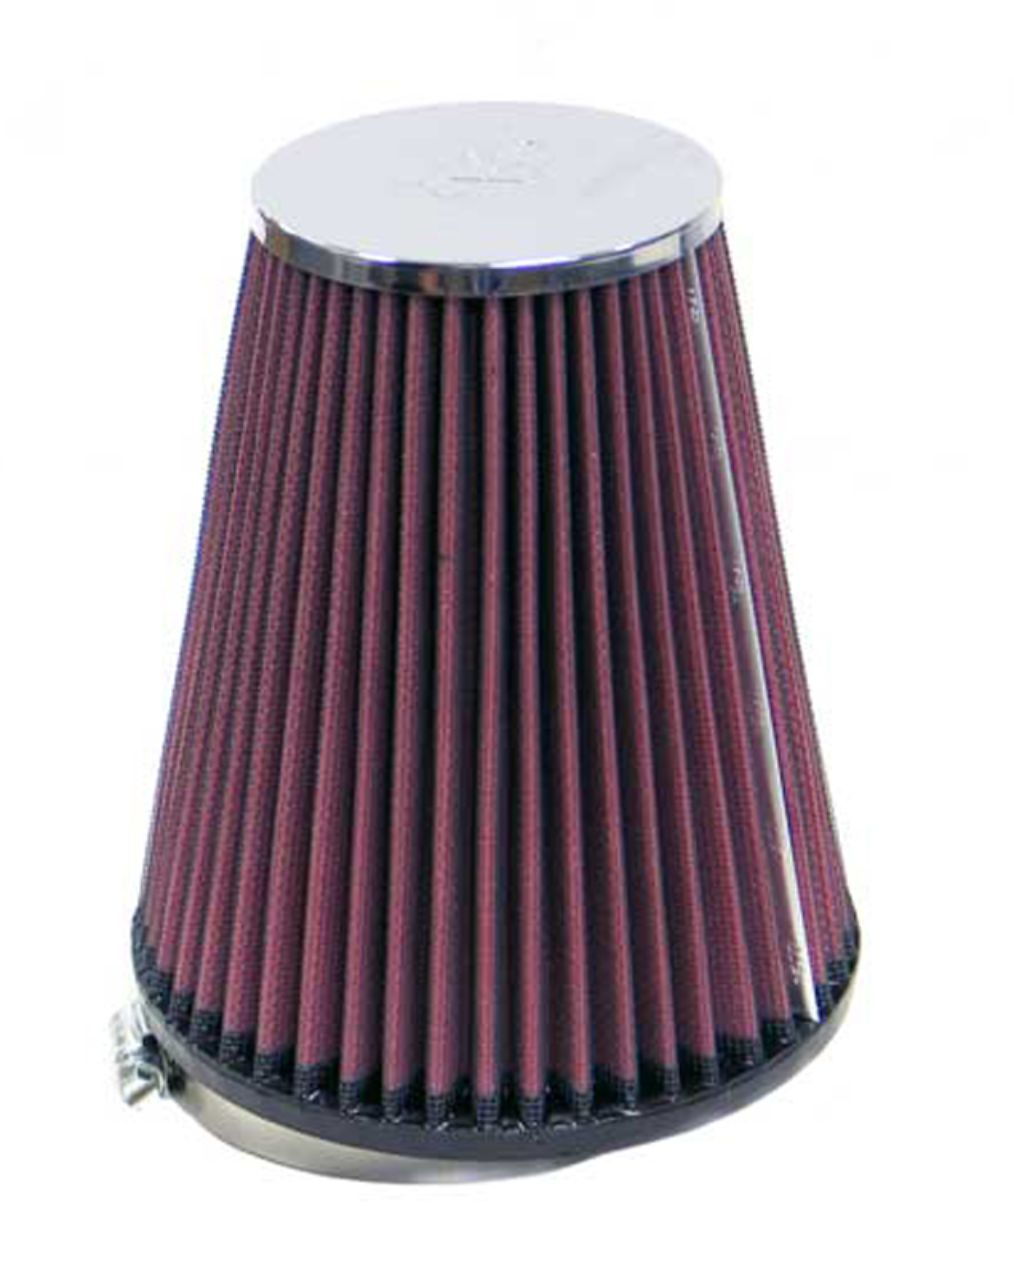 RC-8480 Premium K&N Universal Clamp-On Air Filter: High Performance Replacement Engine Filter: Flange Diameter: 3.75 In Filter Height: 6.75 In Shape: Round Tapered Flange Length: 0.75 In 